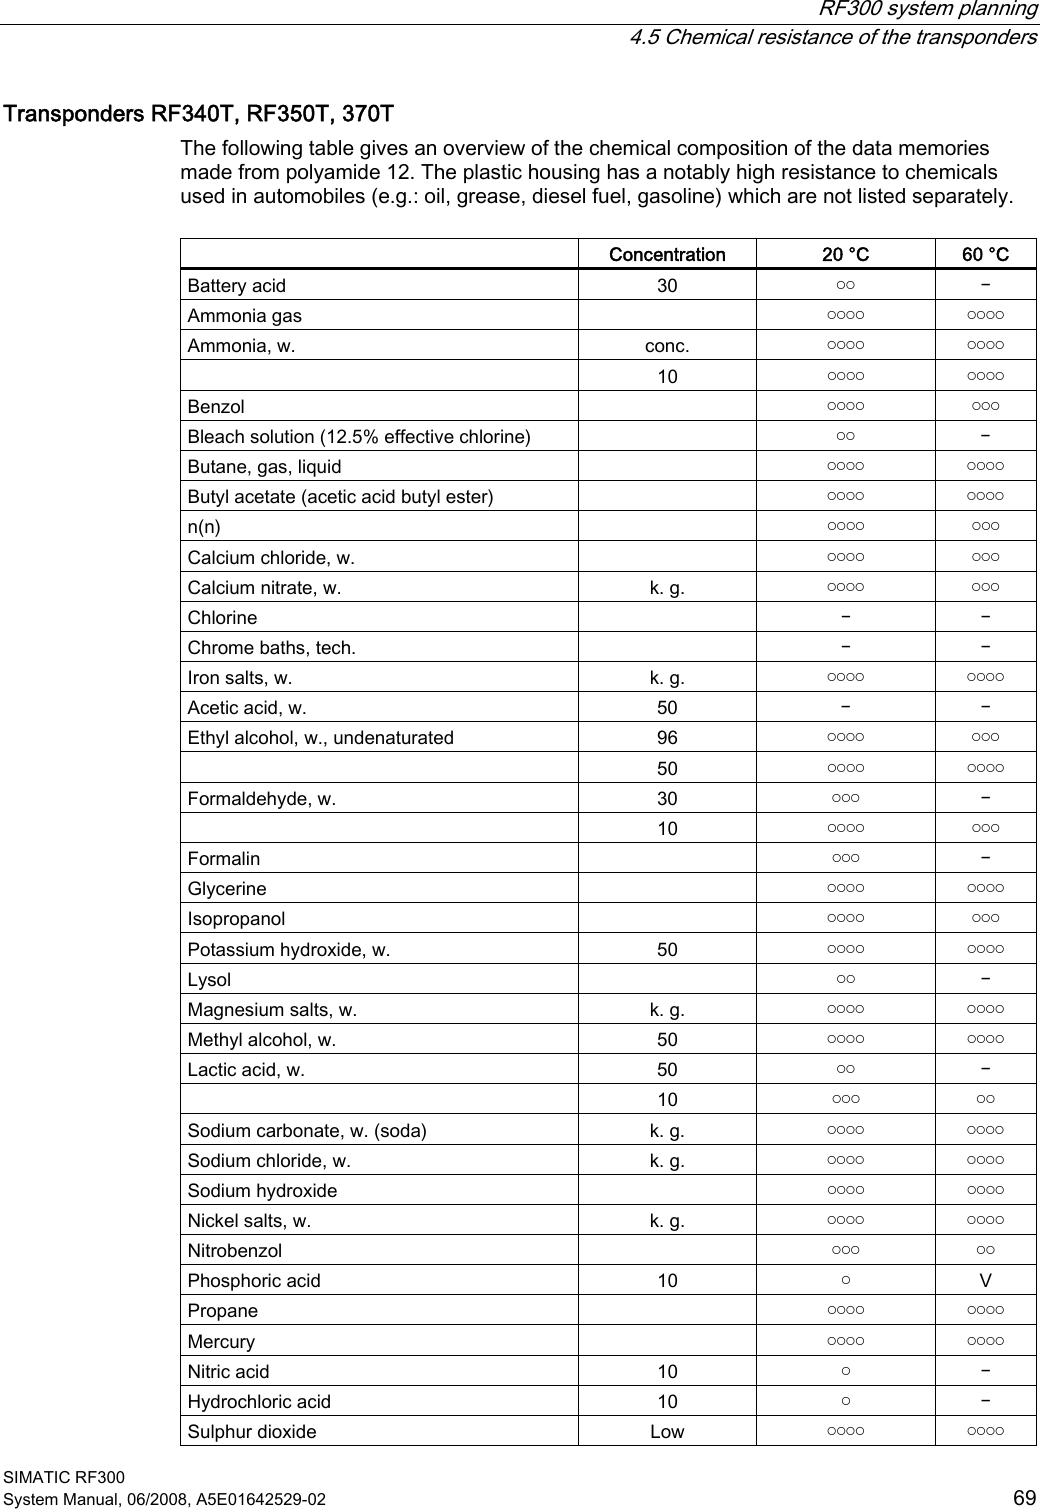  RF300 system planning   4.5 Chemical resistance of the transponders SIMATIC RF300 System Manual, 06/2008, A5E01642529-02  69 Transponders RF340T, RF350T, 370T The following table gives an overview of the chemical composition of the data memories made from polyamide 12. The plastic housing has a notably high resistance to chemicals used in automobiles (e.g.: oil, grease, diesel fuel, gasoline) which are not listed separately.    Concentration  20 °C  60 °C Battery acid  30  ￮￮  ￚ Ammonia gas    ￮￮￮￮  ￮￮￮￮ Ammonia, w.  conc.  ￮￮￮￮  ￮￮￮￮   10  ￮￮￮￮  ￮￮￮￮ Benzol    ￮￮￮￮  ￮￮￮ Bleach solution (12.5% effective chlorine)    ￮￮  ￚ Butane, gas, liquid    ￮￮￮￮  ￮￮￮￮ Butyl acetate (acetic acid butyl ester)    ￮￮￮￮  ￮￮￮￮ n(n)    ￮￮￮￮  ￮￮￮ Calcium chloride, w.    ￮￮￮￮  ￮￮￮ Calcium nitrate, w.  k. g.  ￮￮￮￮  ￮￮￮ Chlorine    ￚ  ￚ Chrome baths, tech.    ￚ  ￚ Iron salts, w.  k. g.  ￮￮￮￮  ￮￮￮￮ Acetic acid, w.  50  ￚ  ￚ Ethyl alcohol, w., undenaturated  96  ￮￮￮￮  ￮￮￮   50  ￮￮￮￮  ￮￮￮￮ Formaldehyde, w.  30  ￮￮￮  ￚ   10  ￮￮￮￮  ￮￮￮ Formalin    ￮￮￮  ￚ Glycerine    ￮￮￮￮  ￮￮￮￮ Isopropanol    ￮￮￮￮  ￮￮￮ Potassium hydroxide, w.  50  ￮￮￮￮  ￮￮￮￮ Lysol    ￮￮  ￚ Magnesium salts, w.  k. g.  ￮￮￮￮  ￮￮￮￮ Methyl alcohol, w.  50  ￮￮￮￮  ￮￮￮￮ Lactic acid, w.  50  ￮￮  ￚ   10  ￮￮￮  ￮￮ Sodium carbonate, w. (soda)  k. g.  ￮￮￮￮  ￮￮￮￮ Sodium chloride, w.  k. g.  ￮￮￮￮  ￮￮￮￮ Sodium hydroxide    ￮￮￮￮  ￮￮￮￮ Nickel salts, w.  k. g.  ￮￮￮￮  ￮￮￮￮ Nitrobenzol    ￮￮￮  ￮￮ Phosphoric acid  10  ￮  V Propane    ￮￮￮￮  ￮￮￮￮ Mercury    ￮￮￮￮  ￮￮￮￮ Nitric acid  10  ￮  ￚ Hydrochloric acid  10  ￮  ￚ Sulphur dioxide  Low  ￮￮￮￮  ￮￮￮￮ 